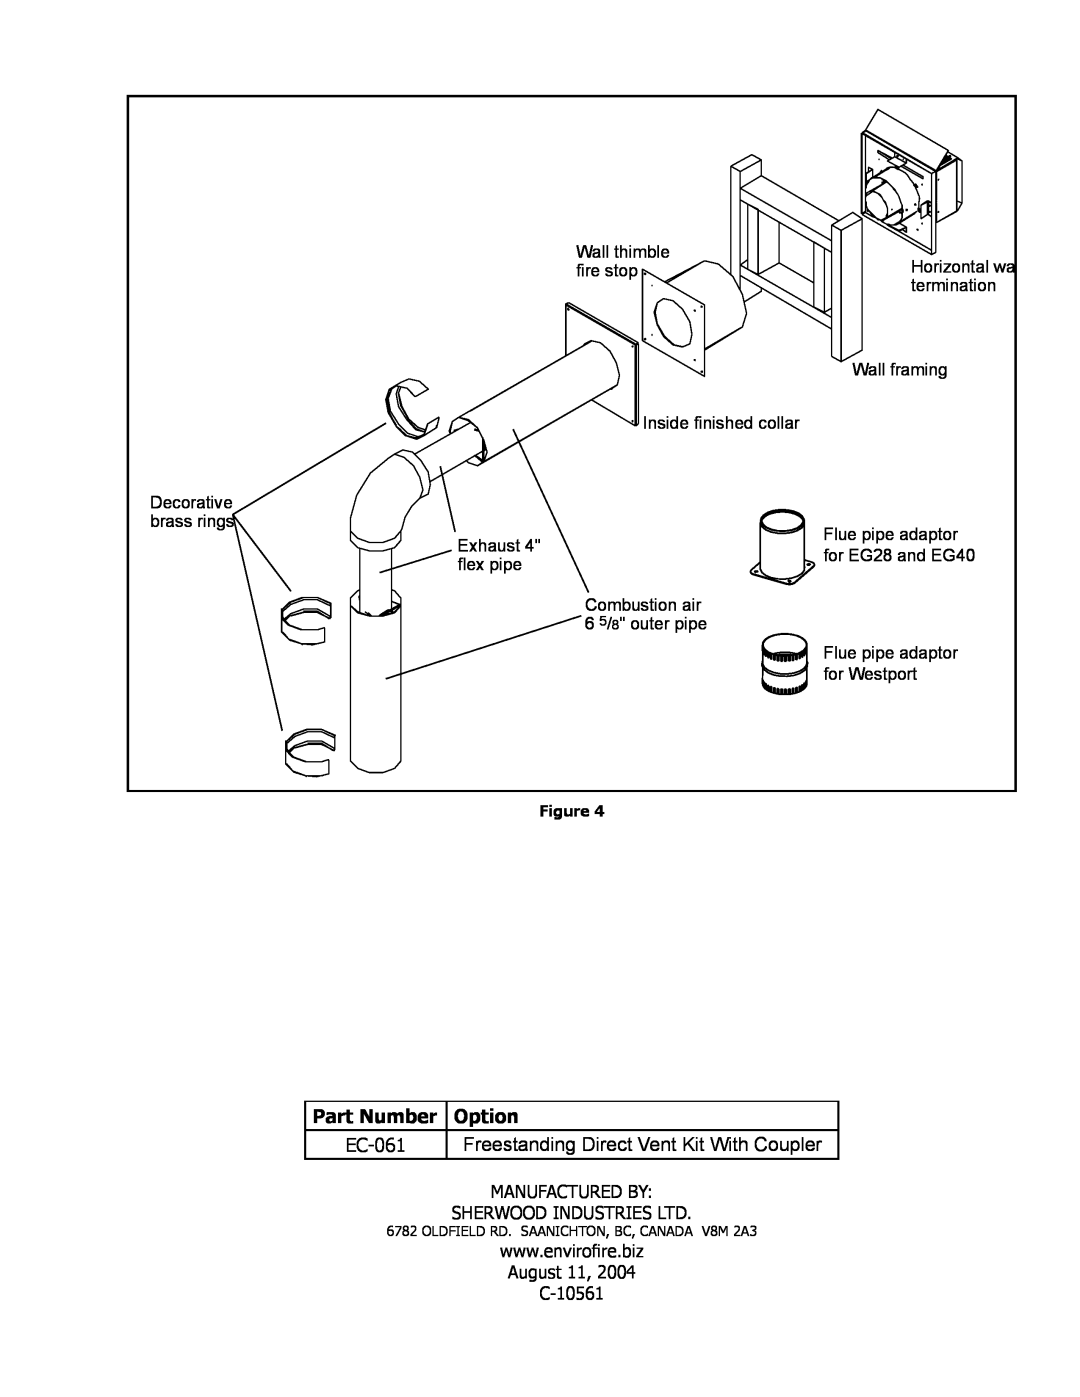 Enviro EC-061 installation instructions Part Number, Option, Freestanding Direct Vent Kit With Coupler 